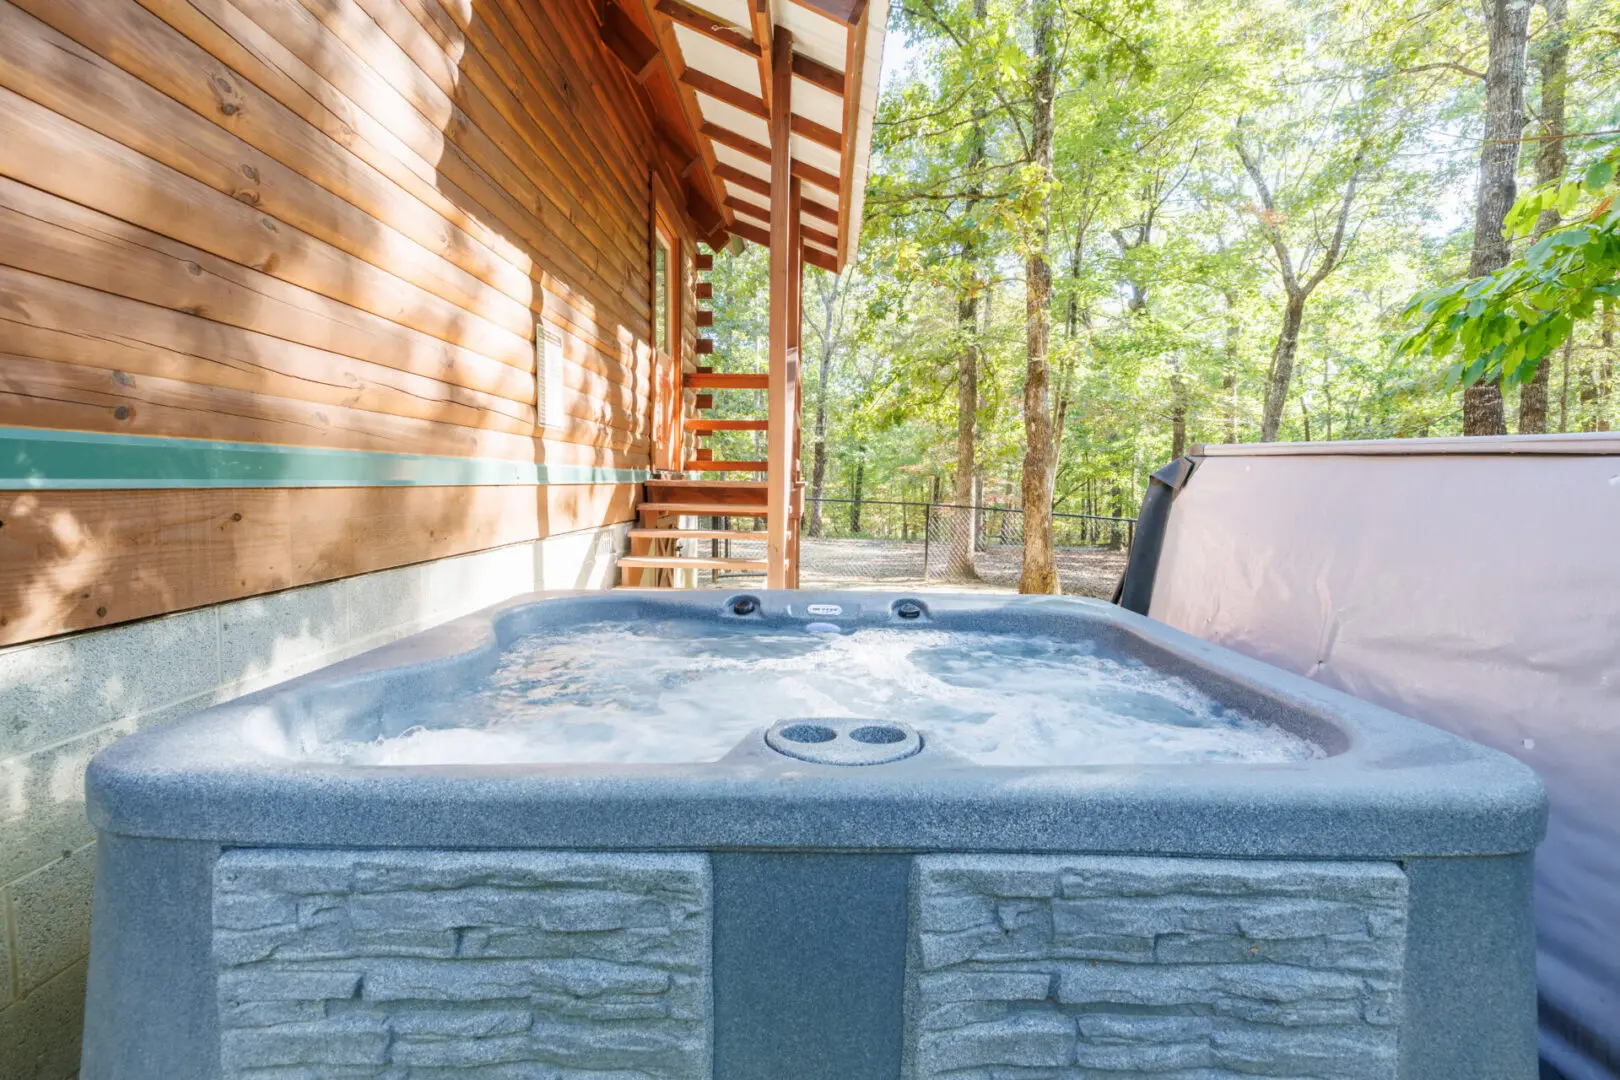 A hot tub in front of a cabin in pigeon forge.